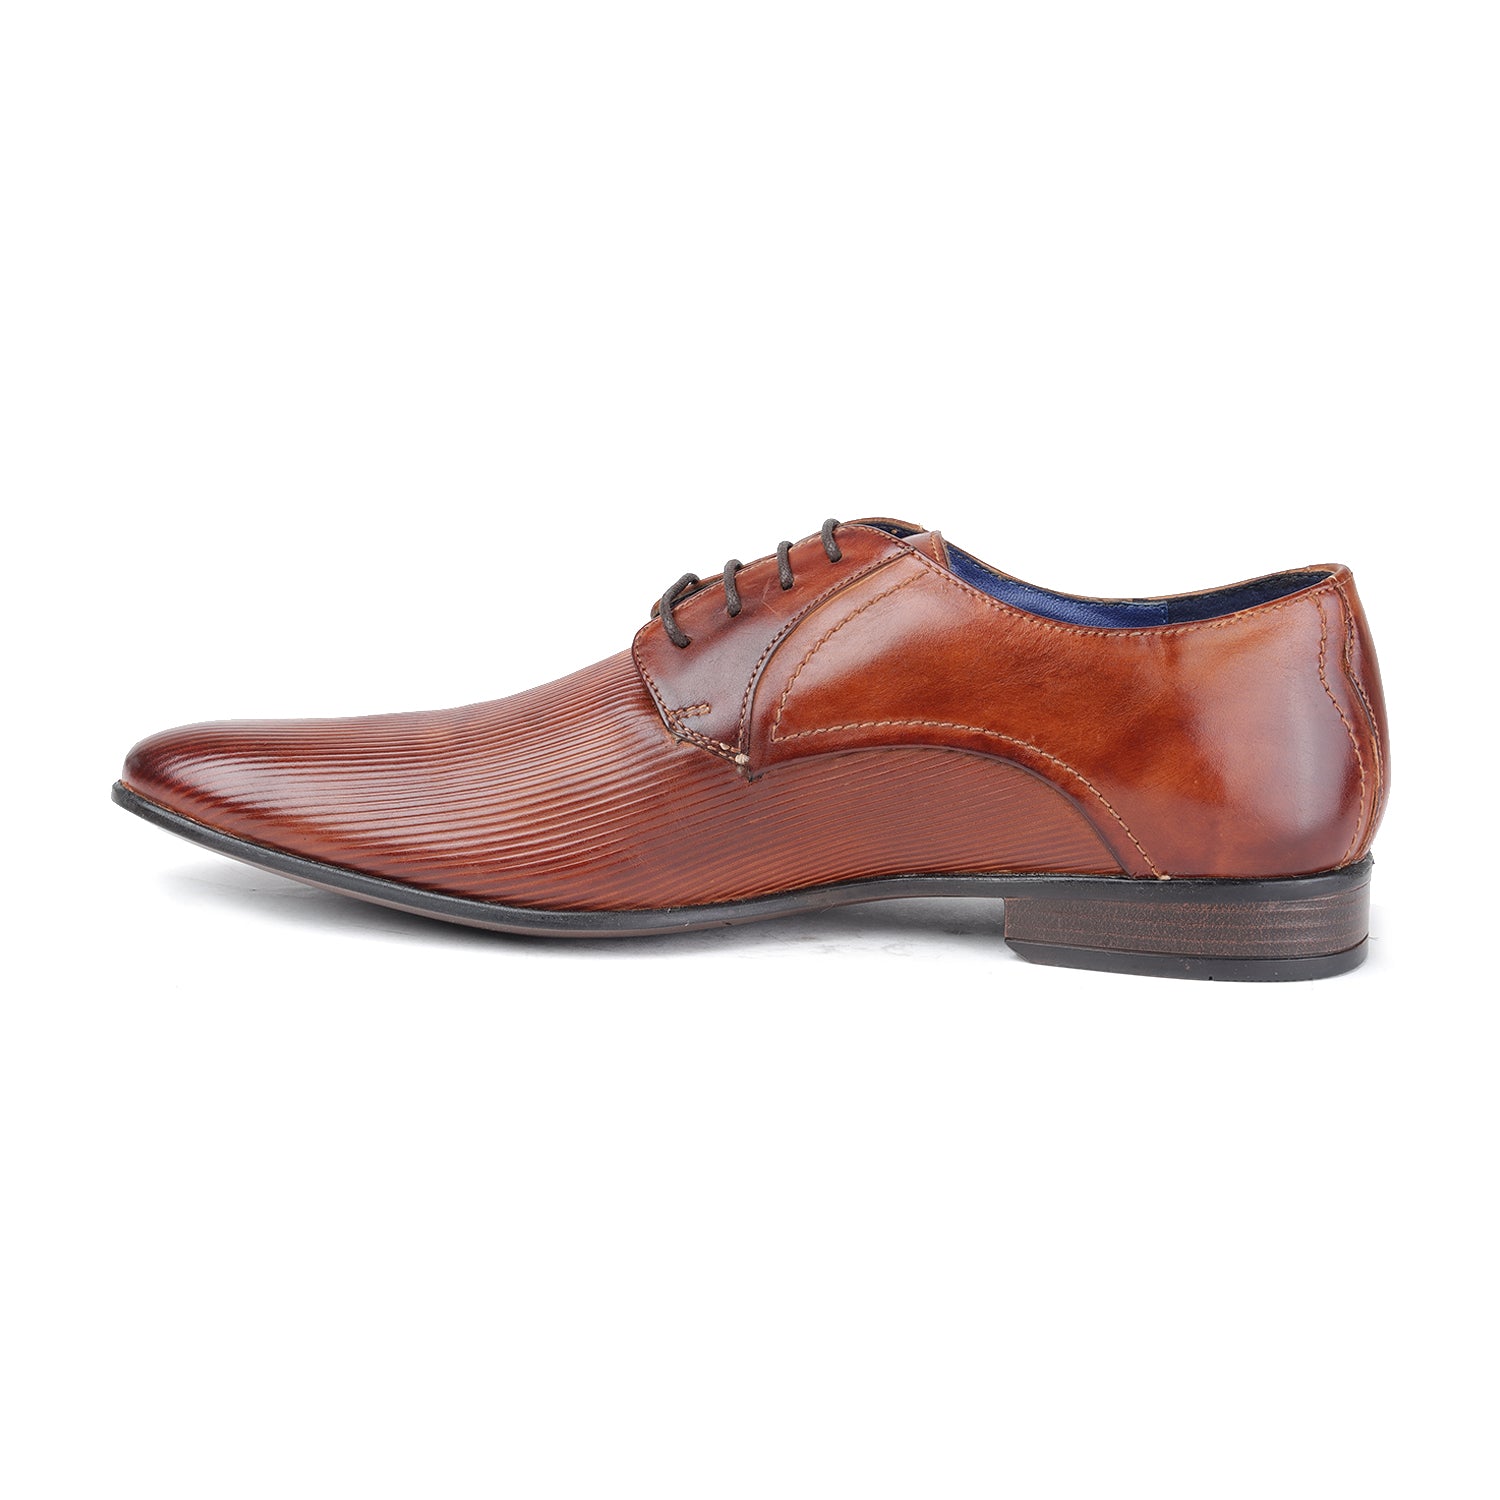 MASABIH GENUINE LEATHER DERBY LACEUP SHOES FOR MEN TAN